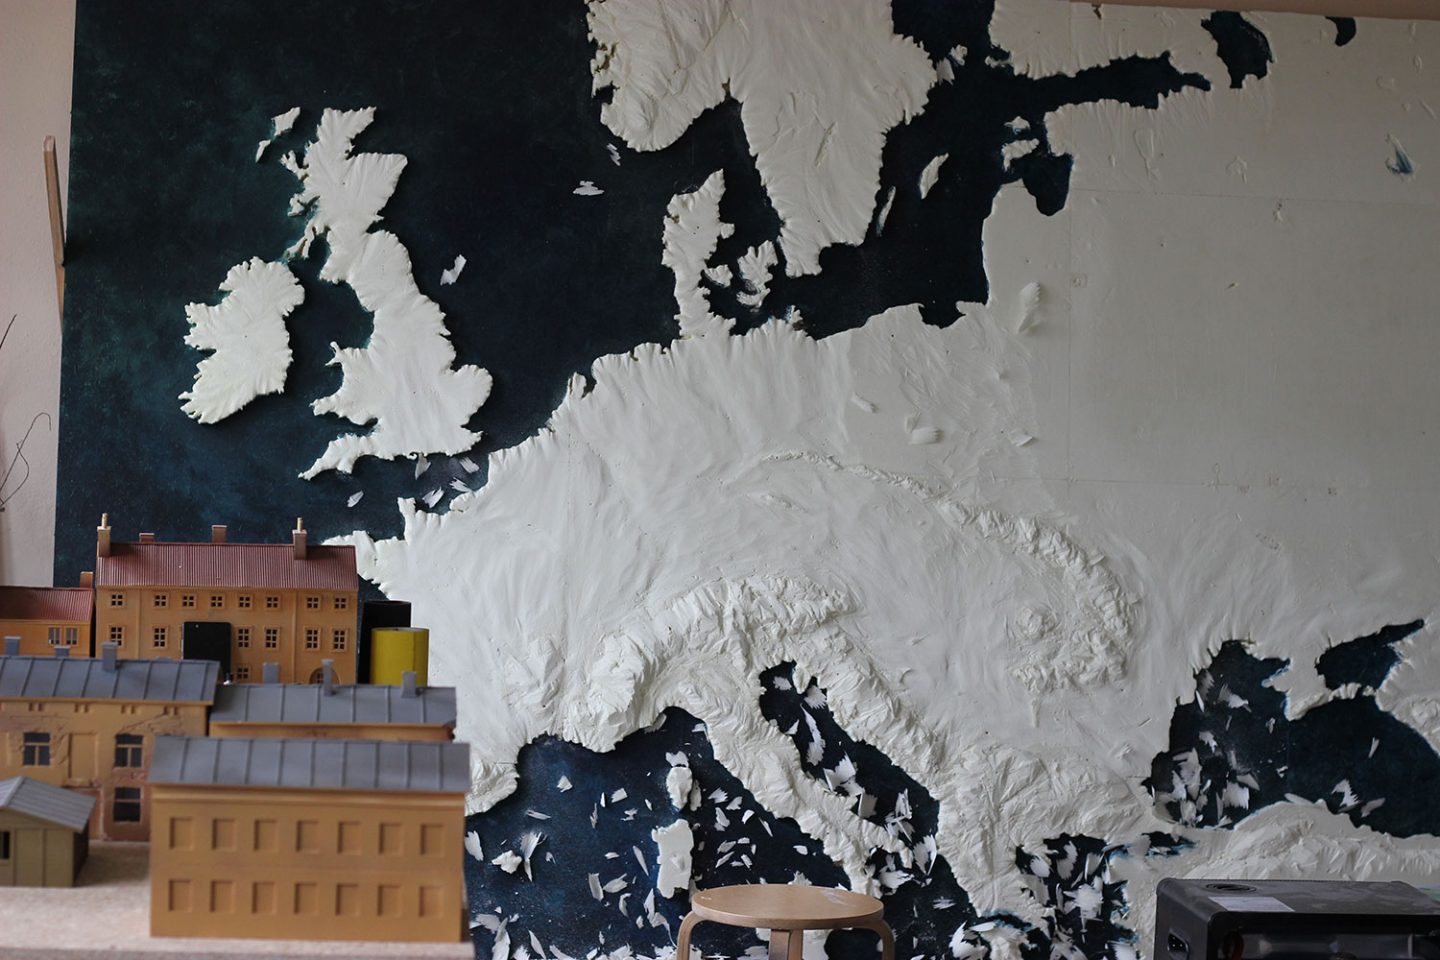 A work-in-progress shot of a three-dimensional map of Europe that will be used in the series.